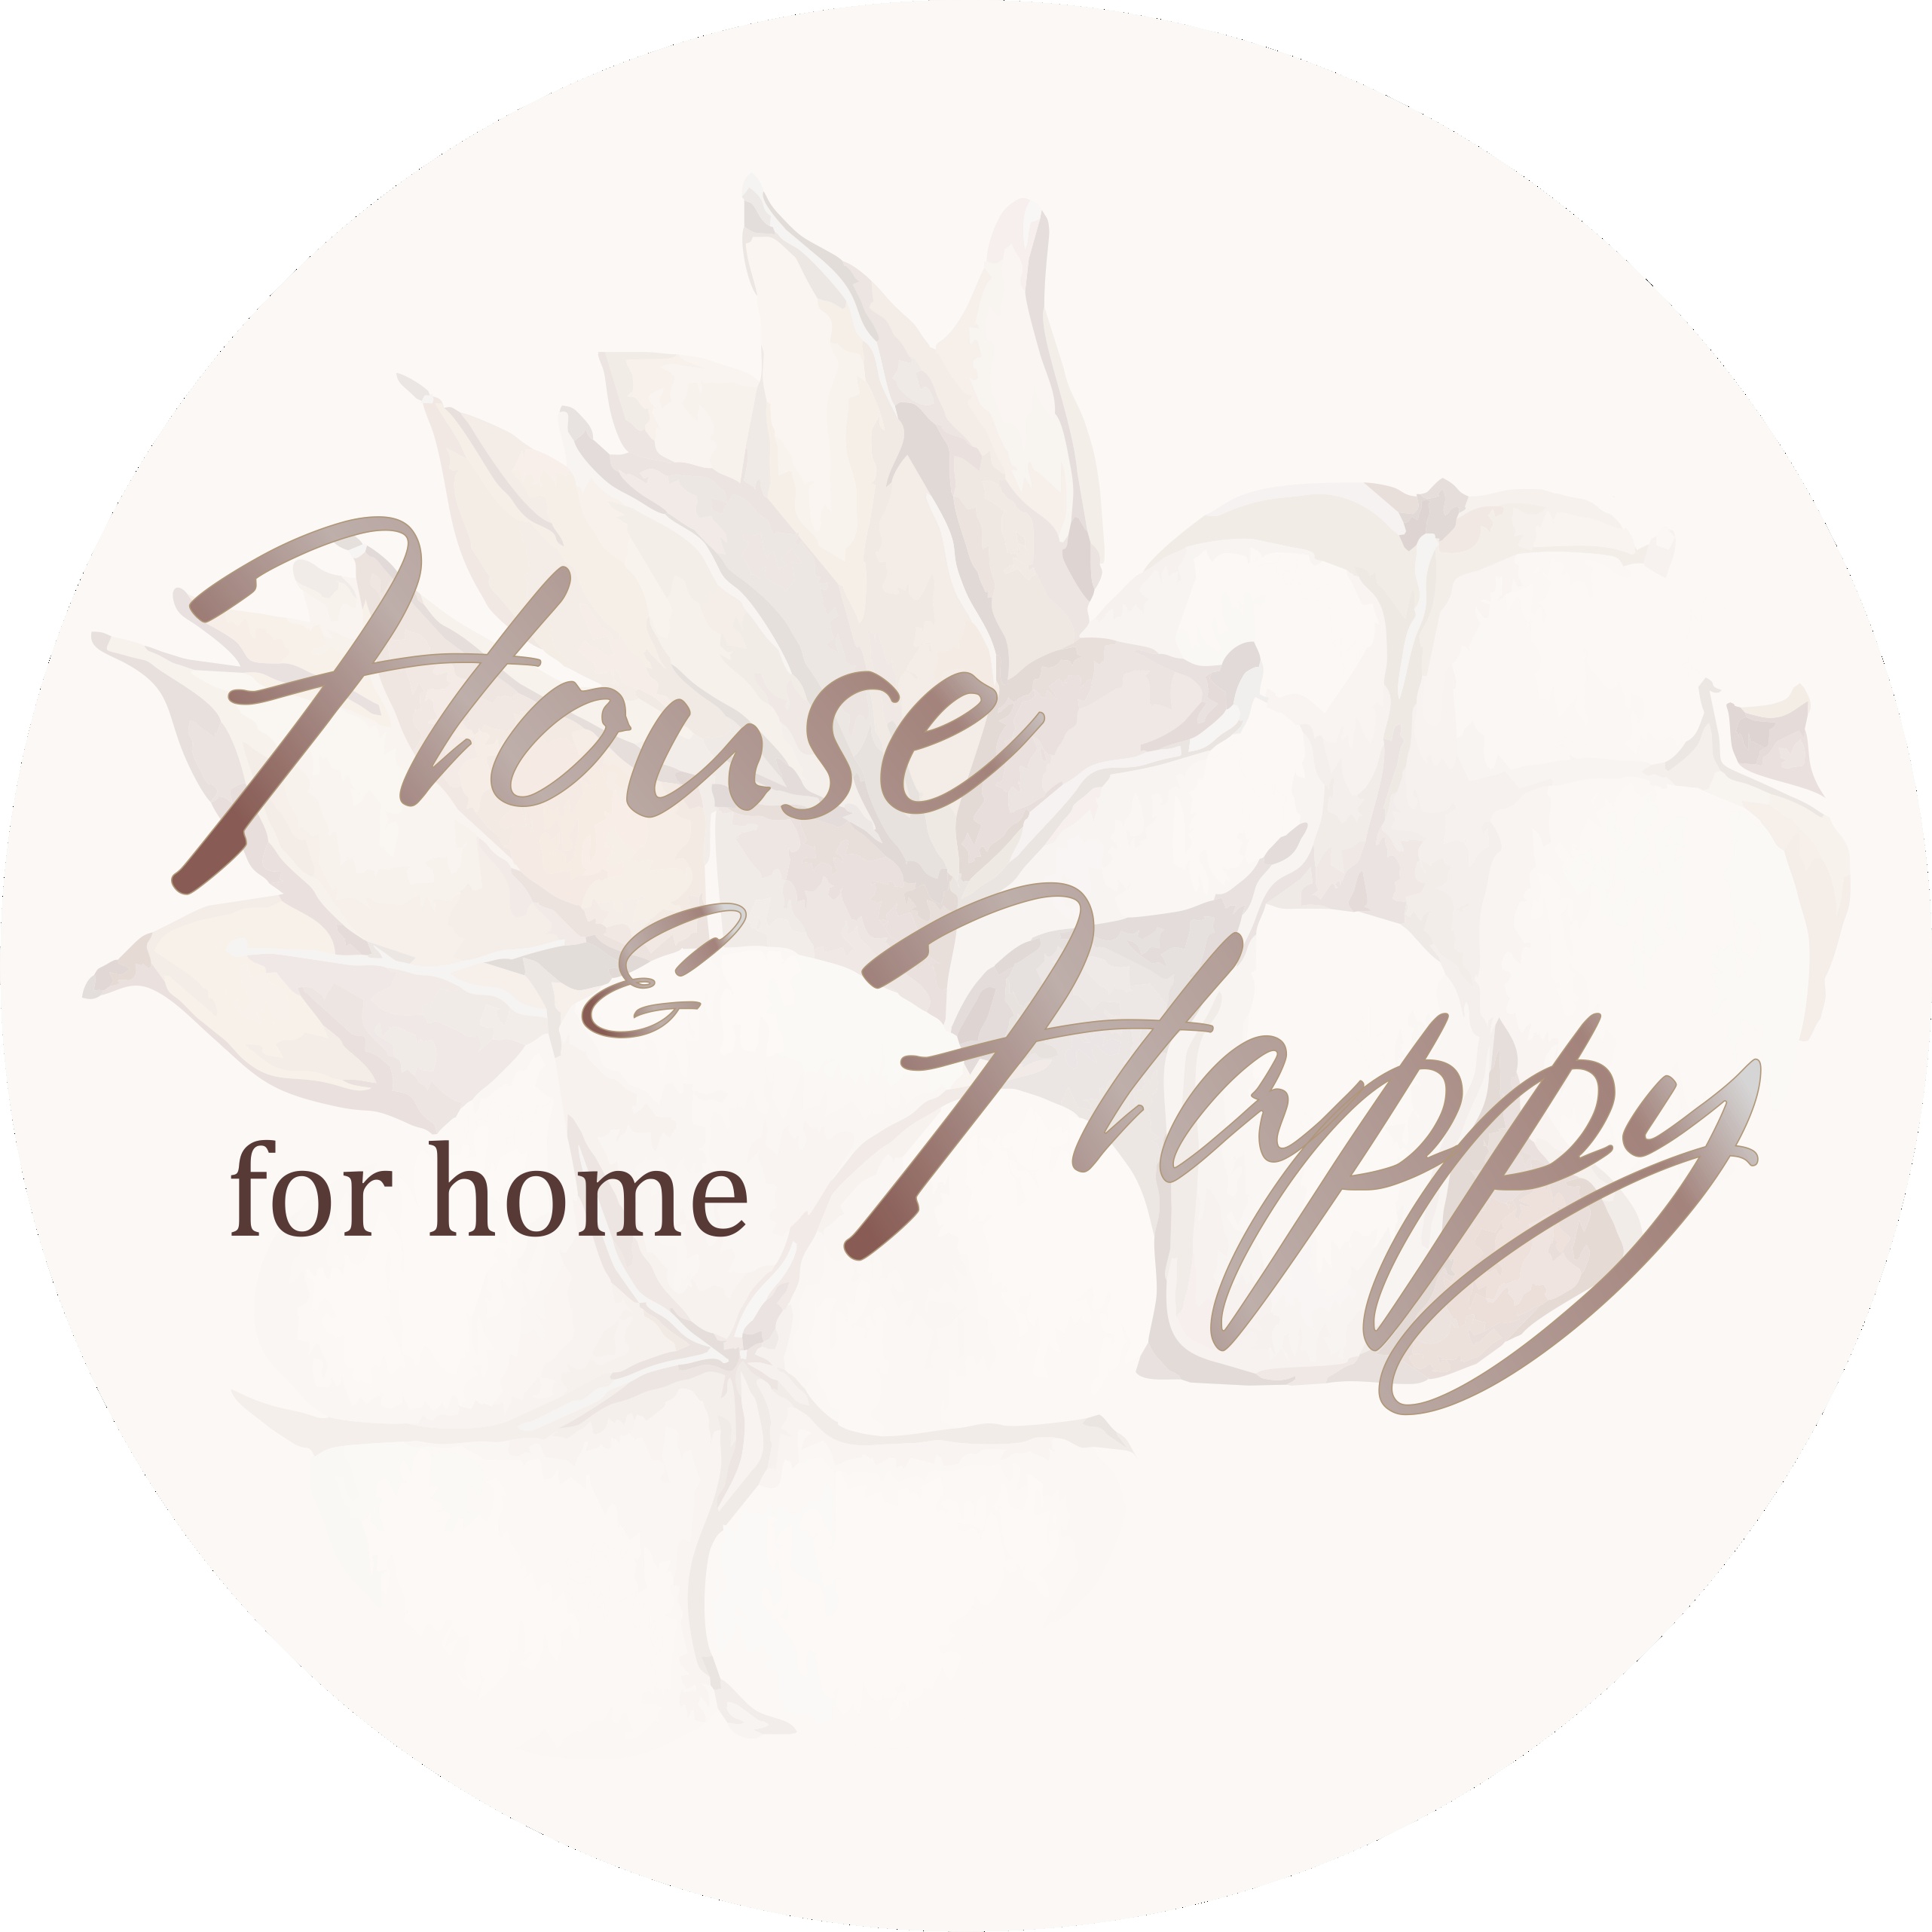 House and Happy